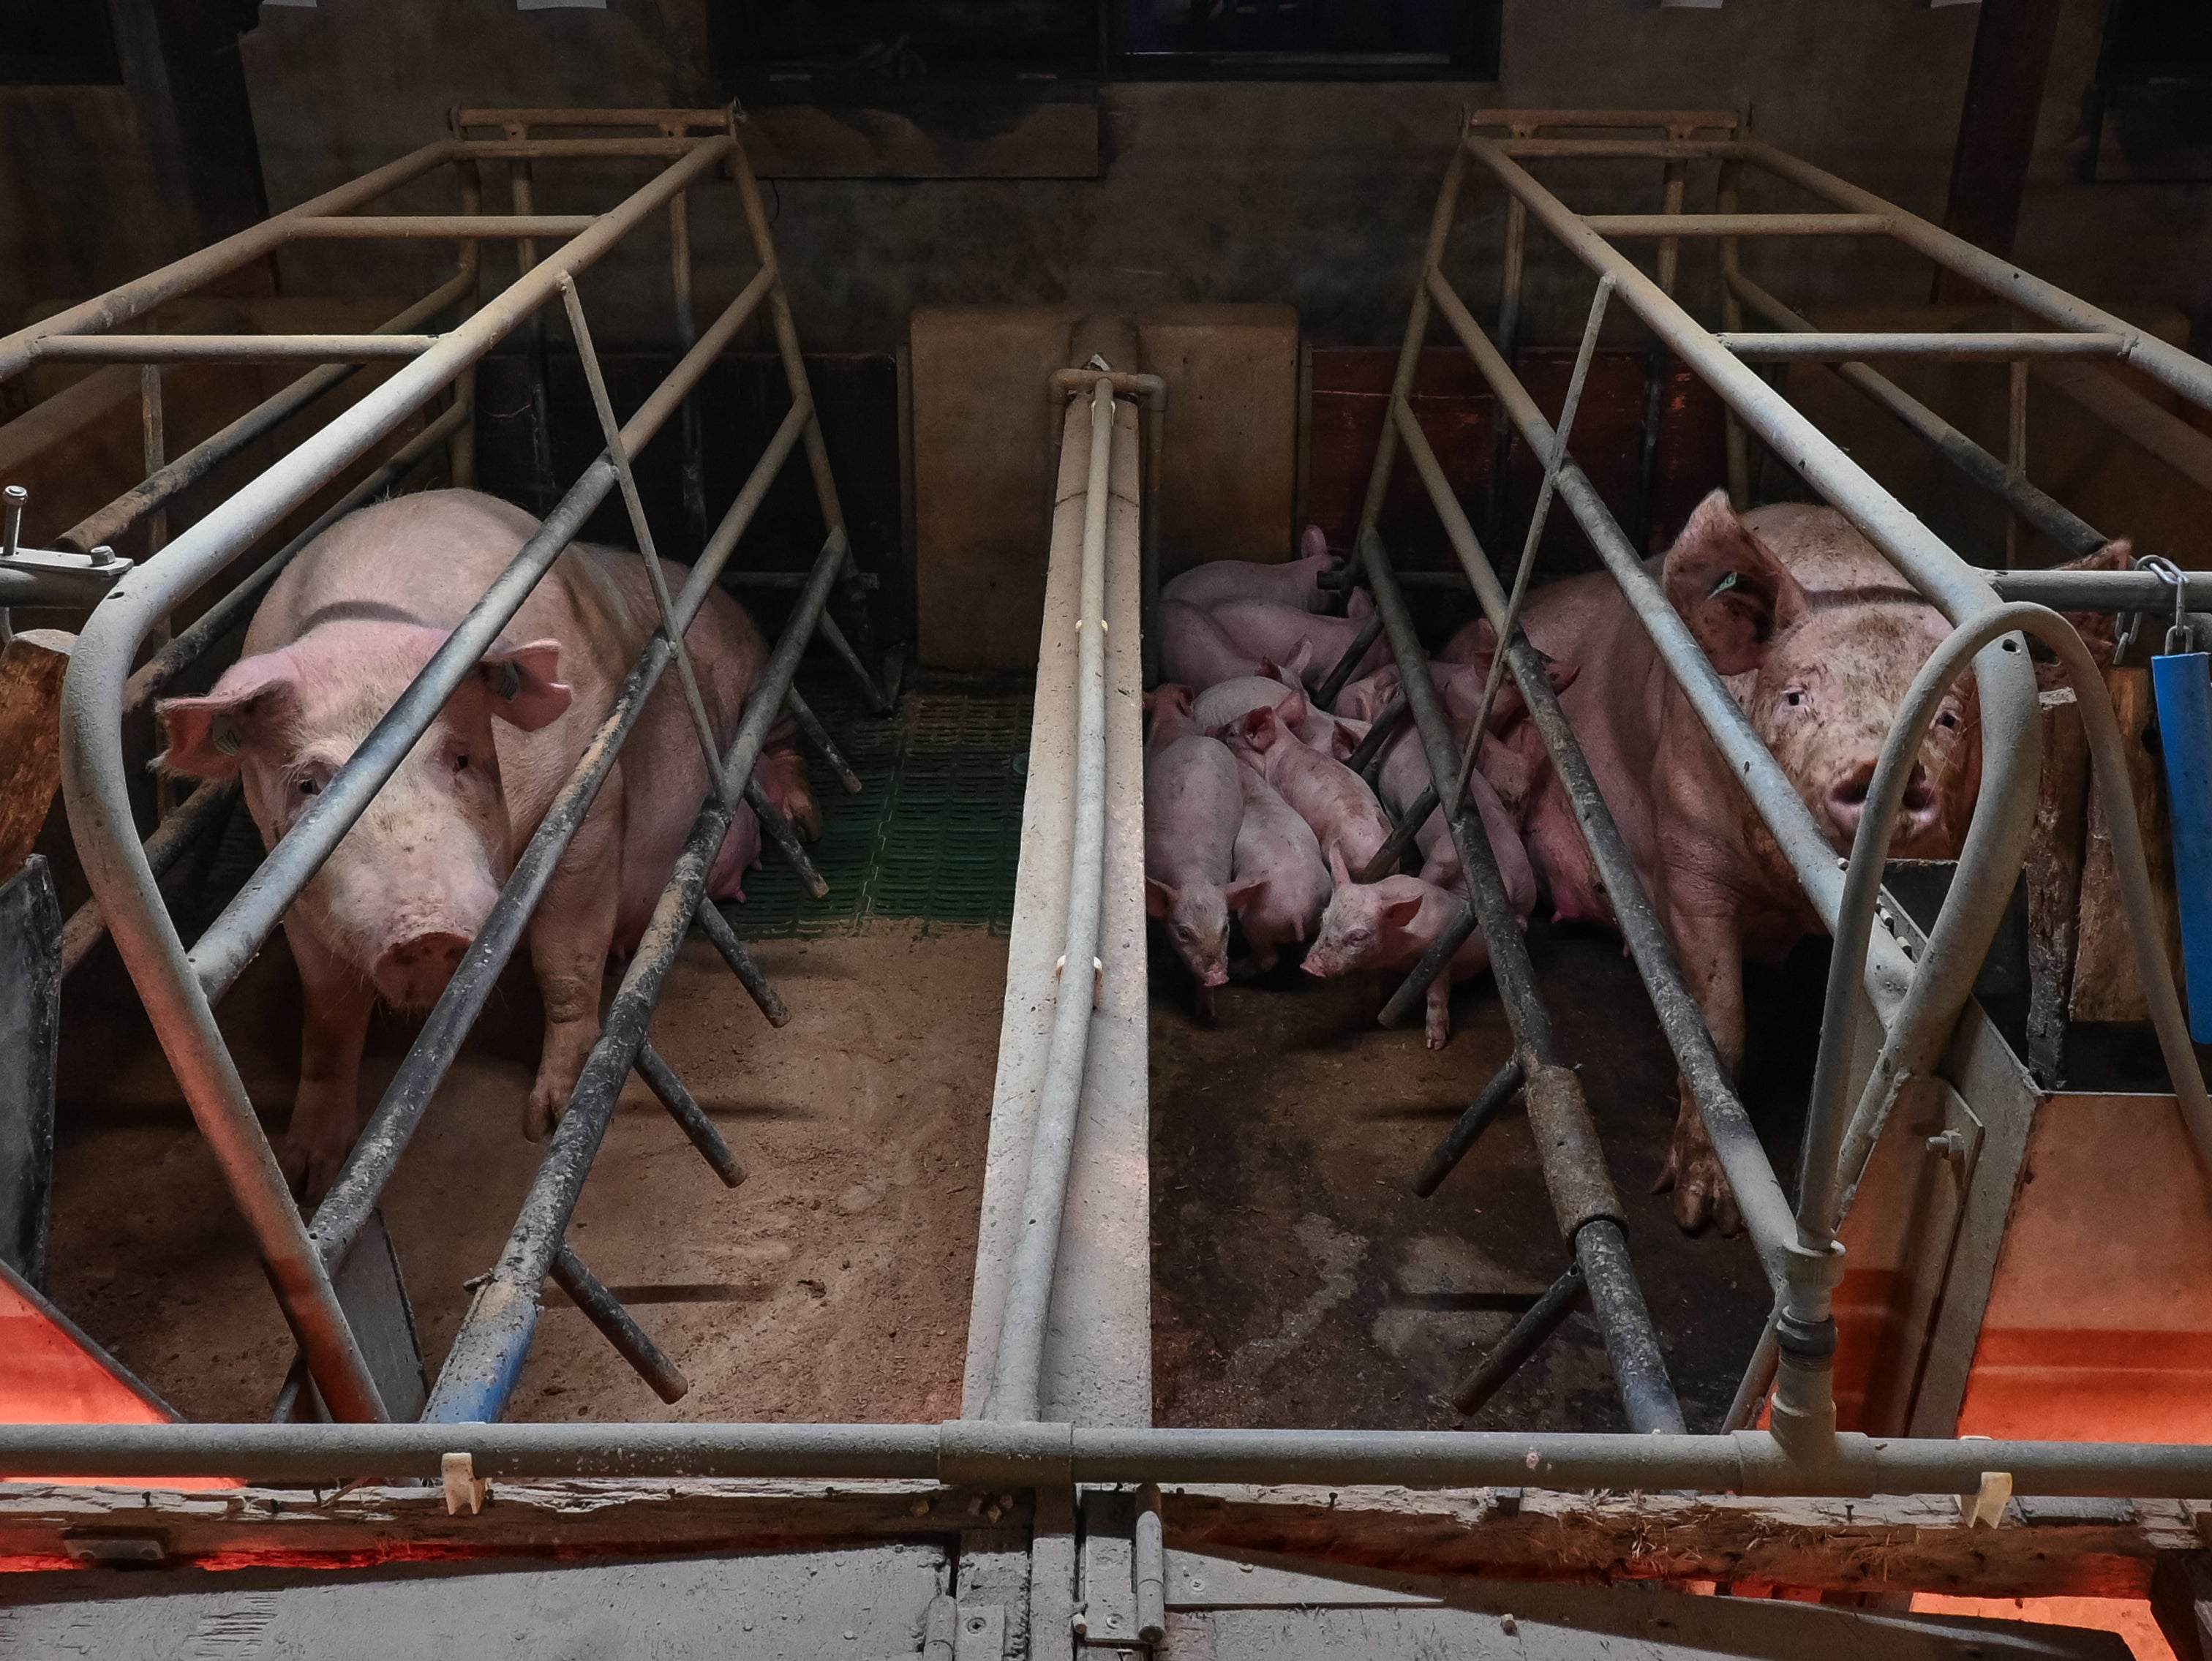 Farrowing crates are being banned in other countries